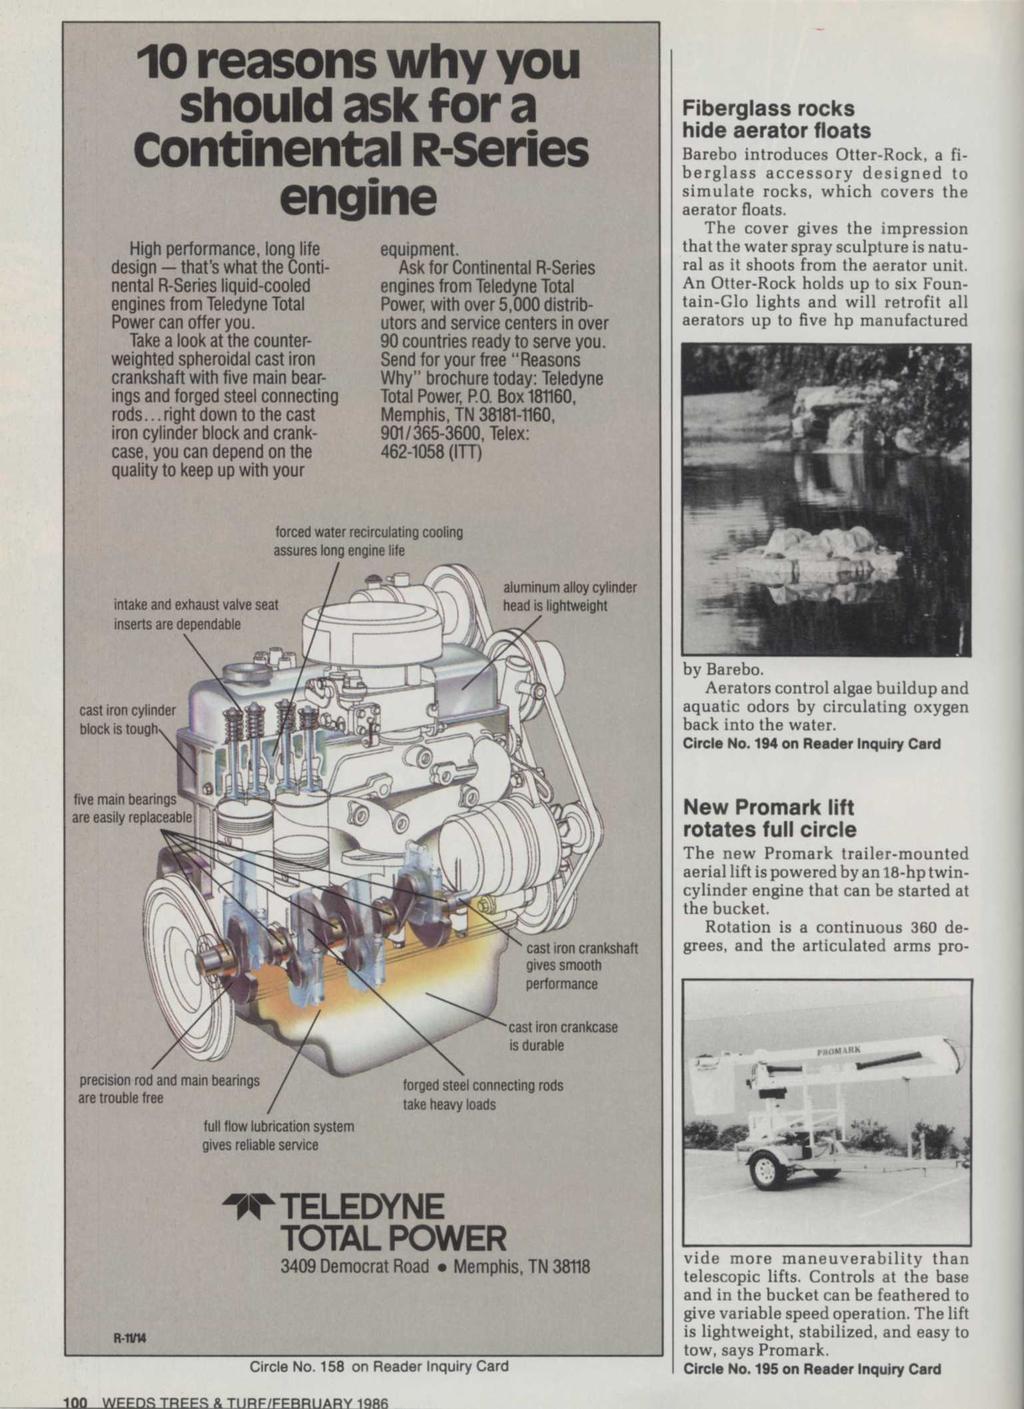 1QQ WFFDS TRFFS ft TURF/FFBRUARY 1986 10 reasons why you should ask for a Continental R-Sevies engine High performance, long life design that's what the Continental R-Series liquid-cooled engines